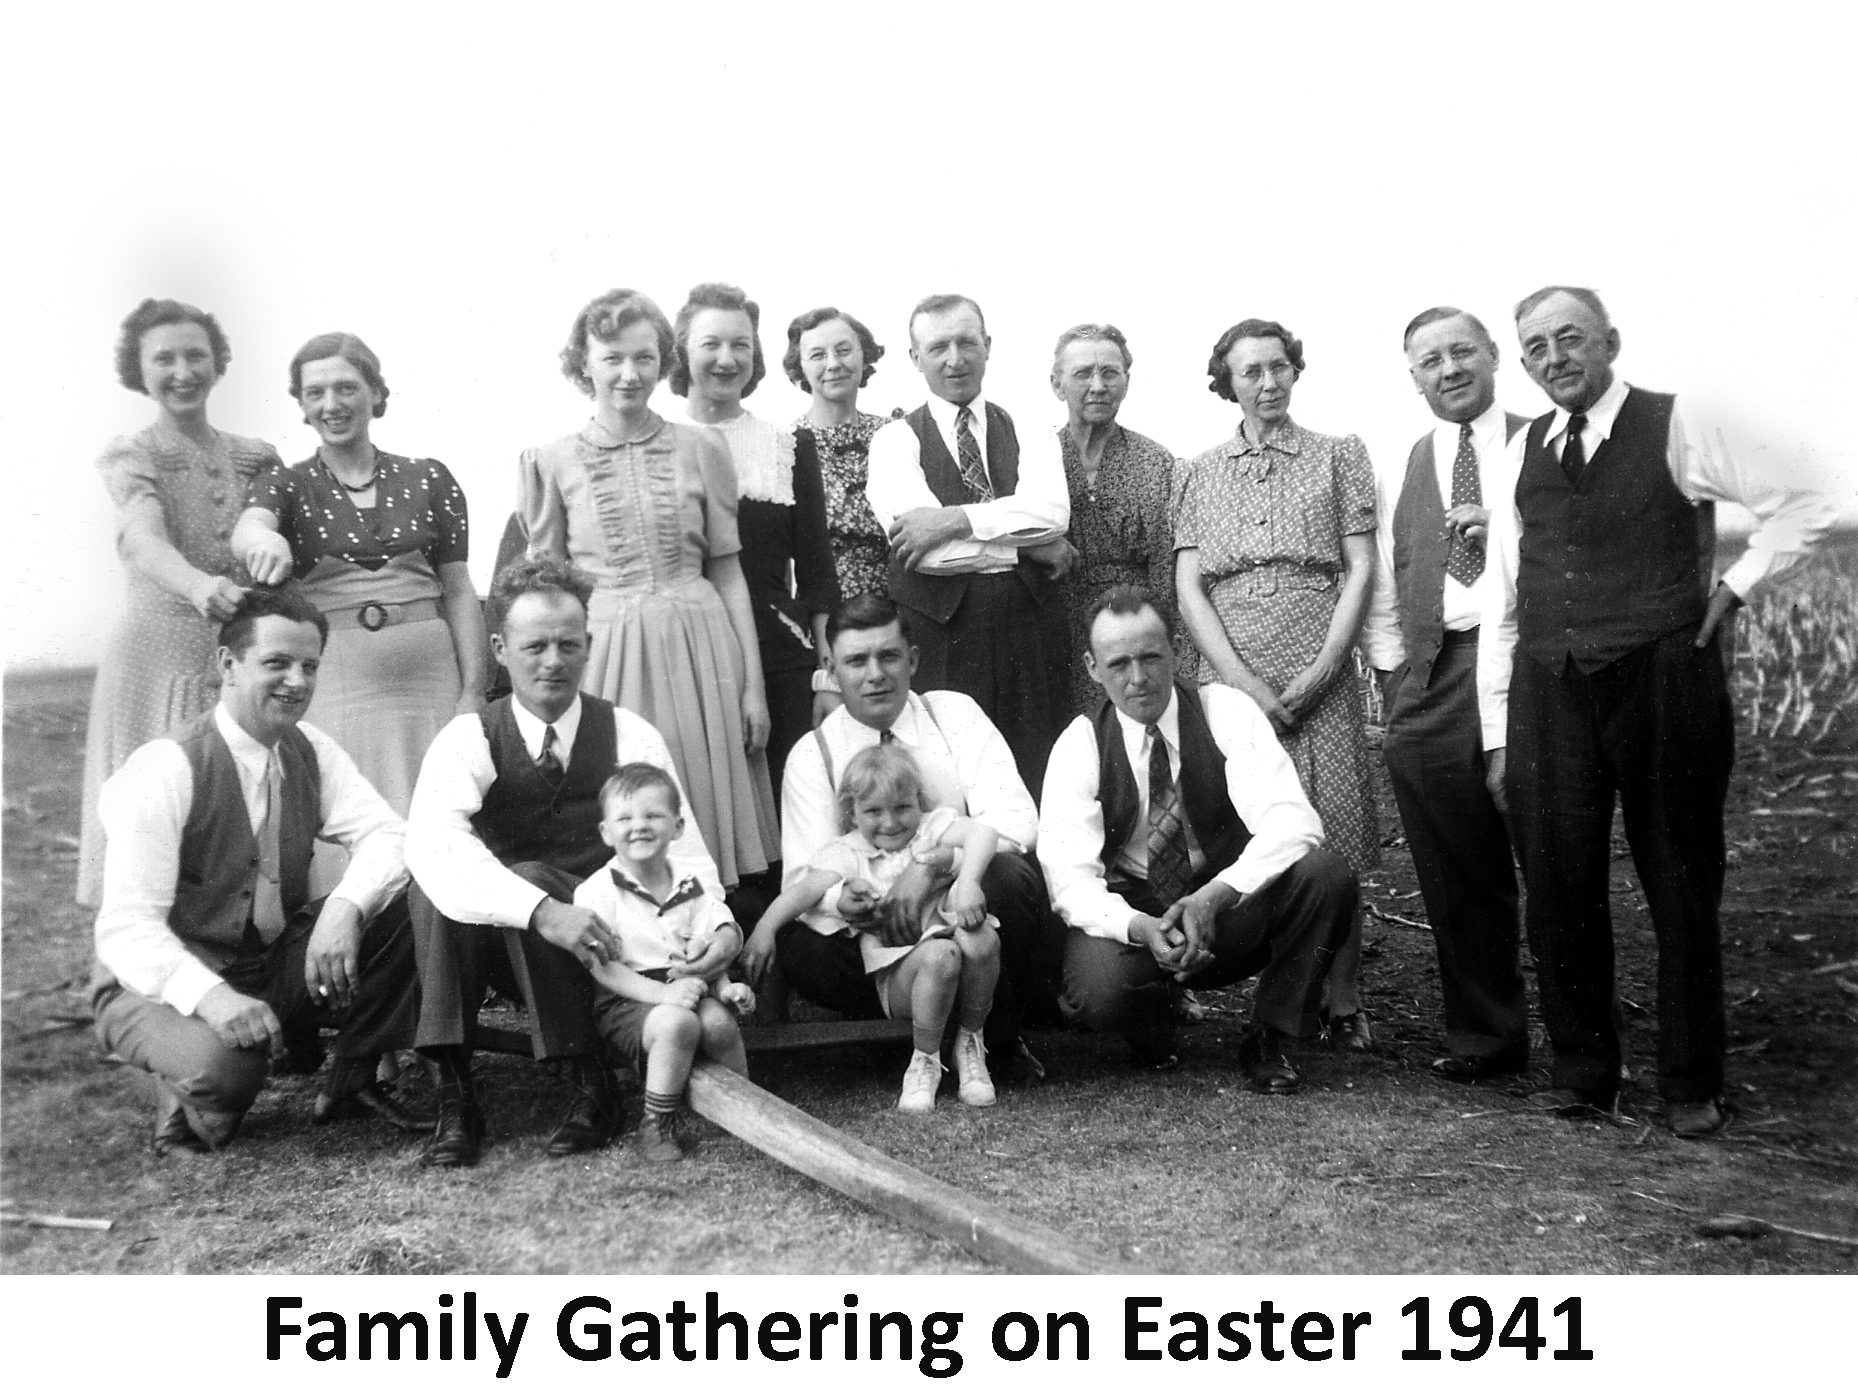 Fred and Ella Henjes with their daughters, the daughter's husbands,
           grandchildren, and other relatives on Easter 1941